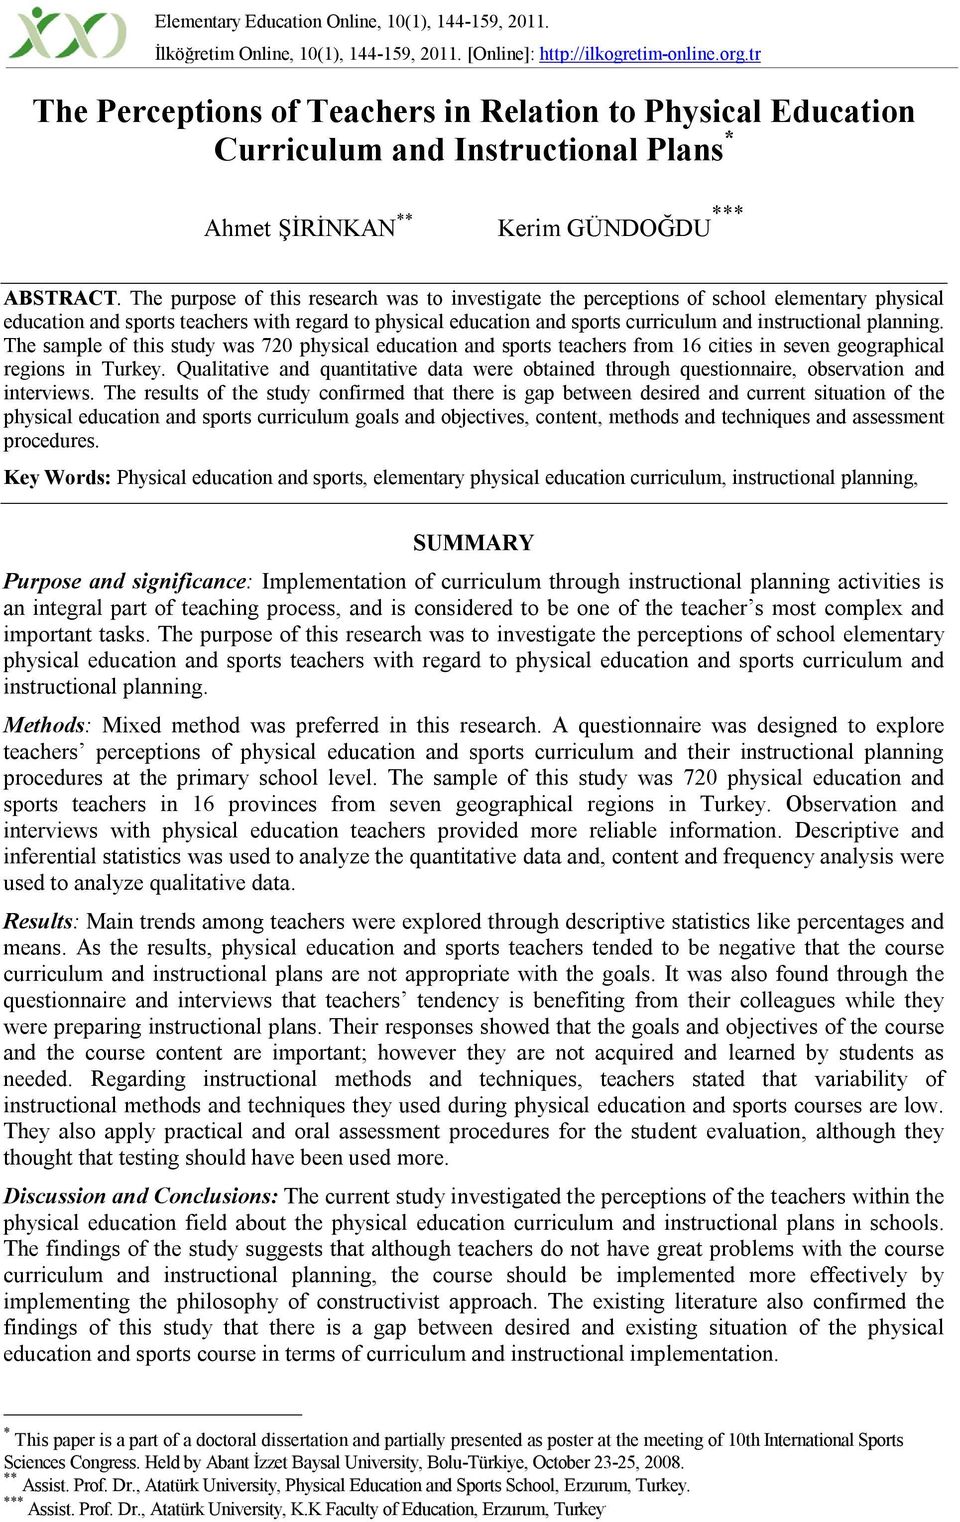 The purpose of this research was to investigate the perceptions of school elementary physical education and sports teachers with regard to physical education and sports curriculum and instructional